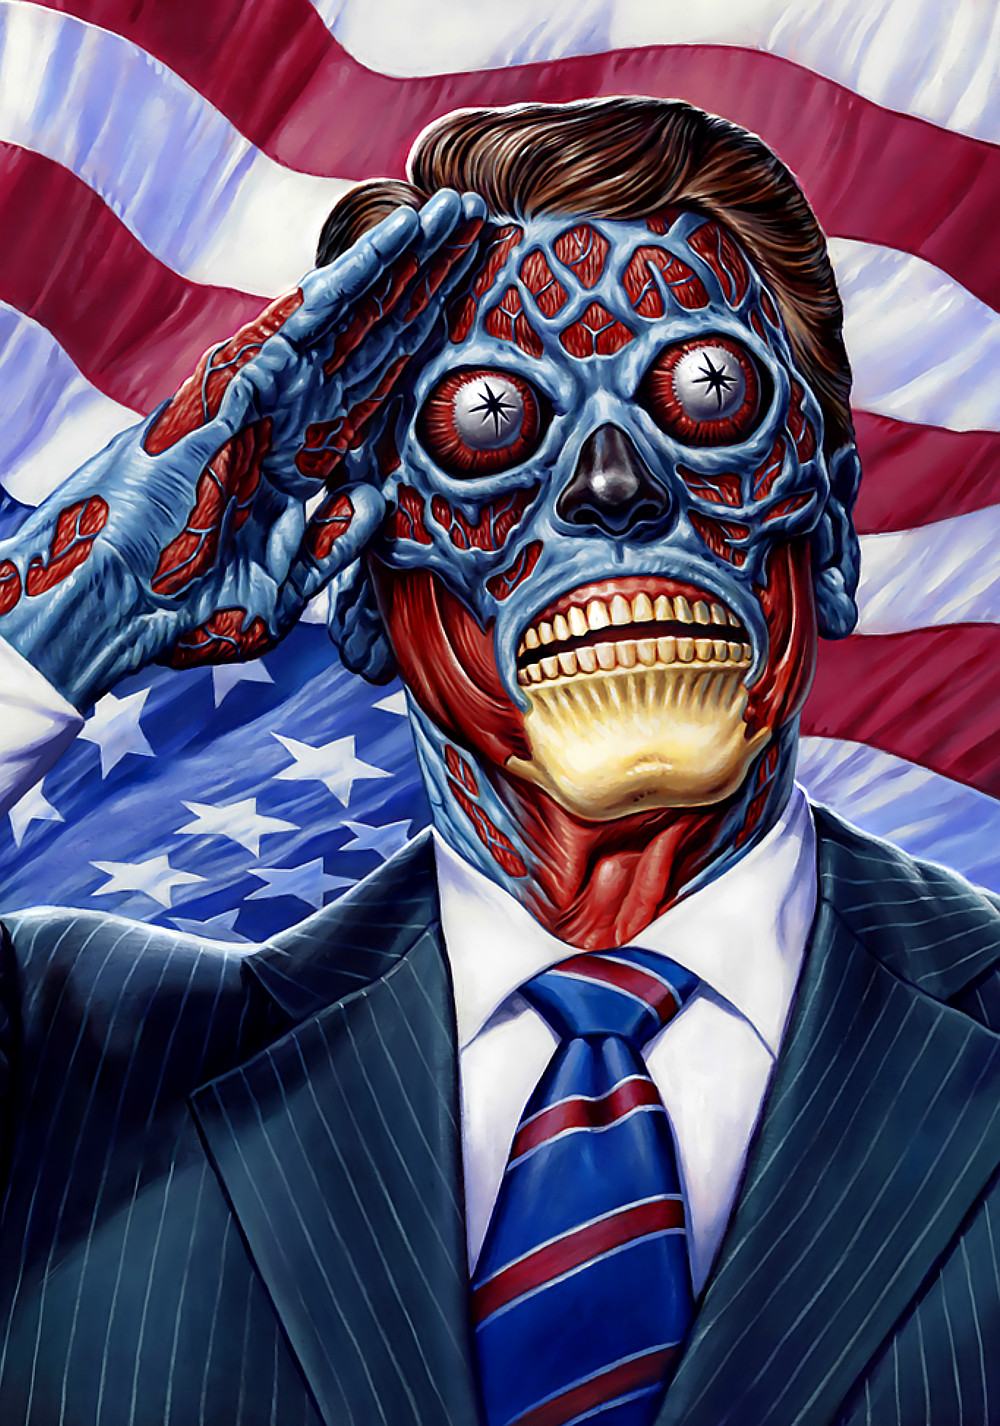 They Live film